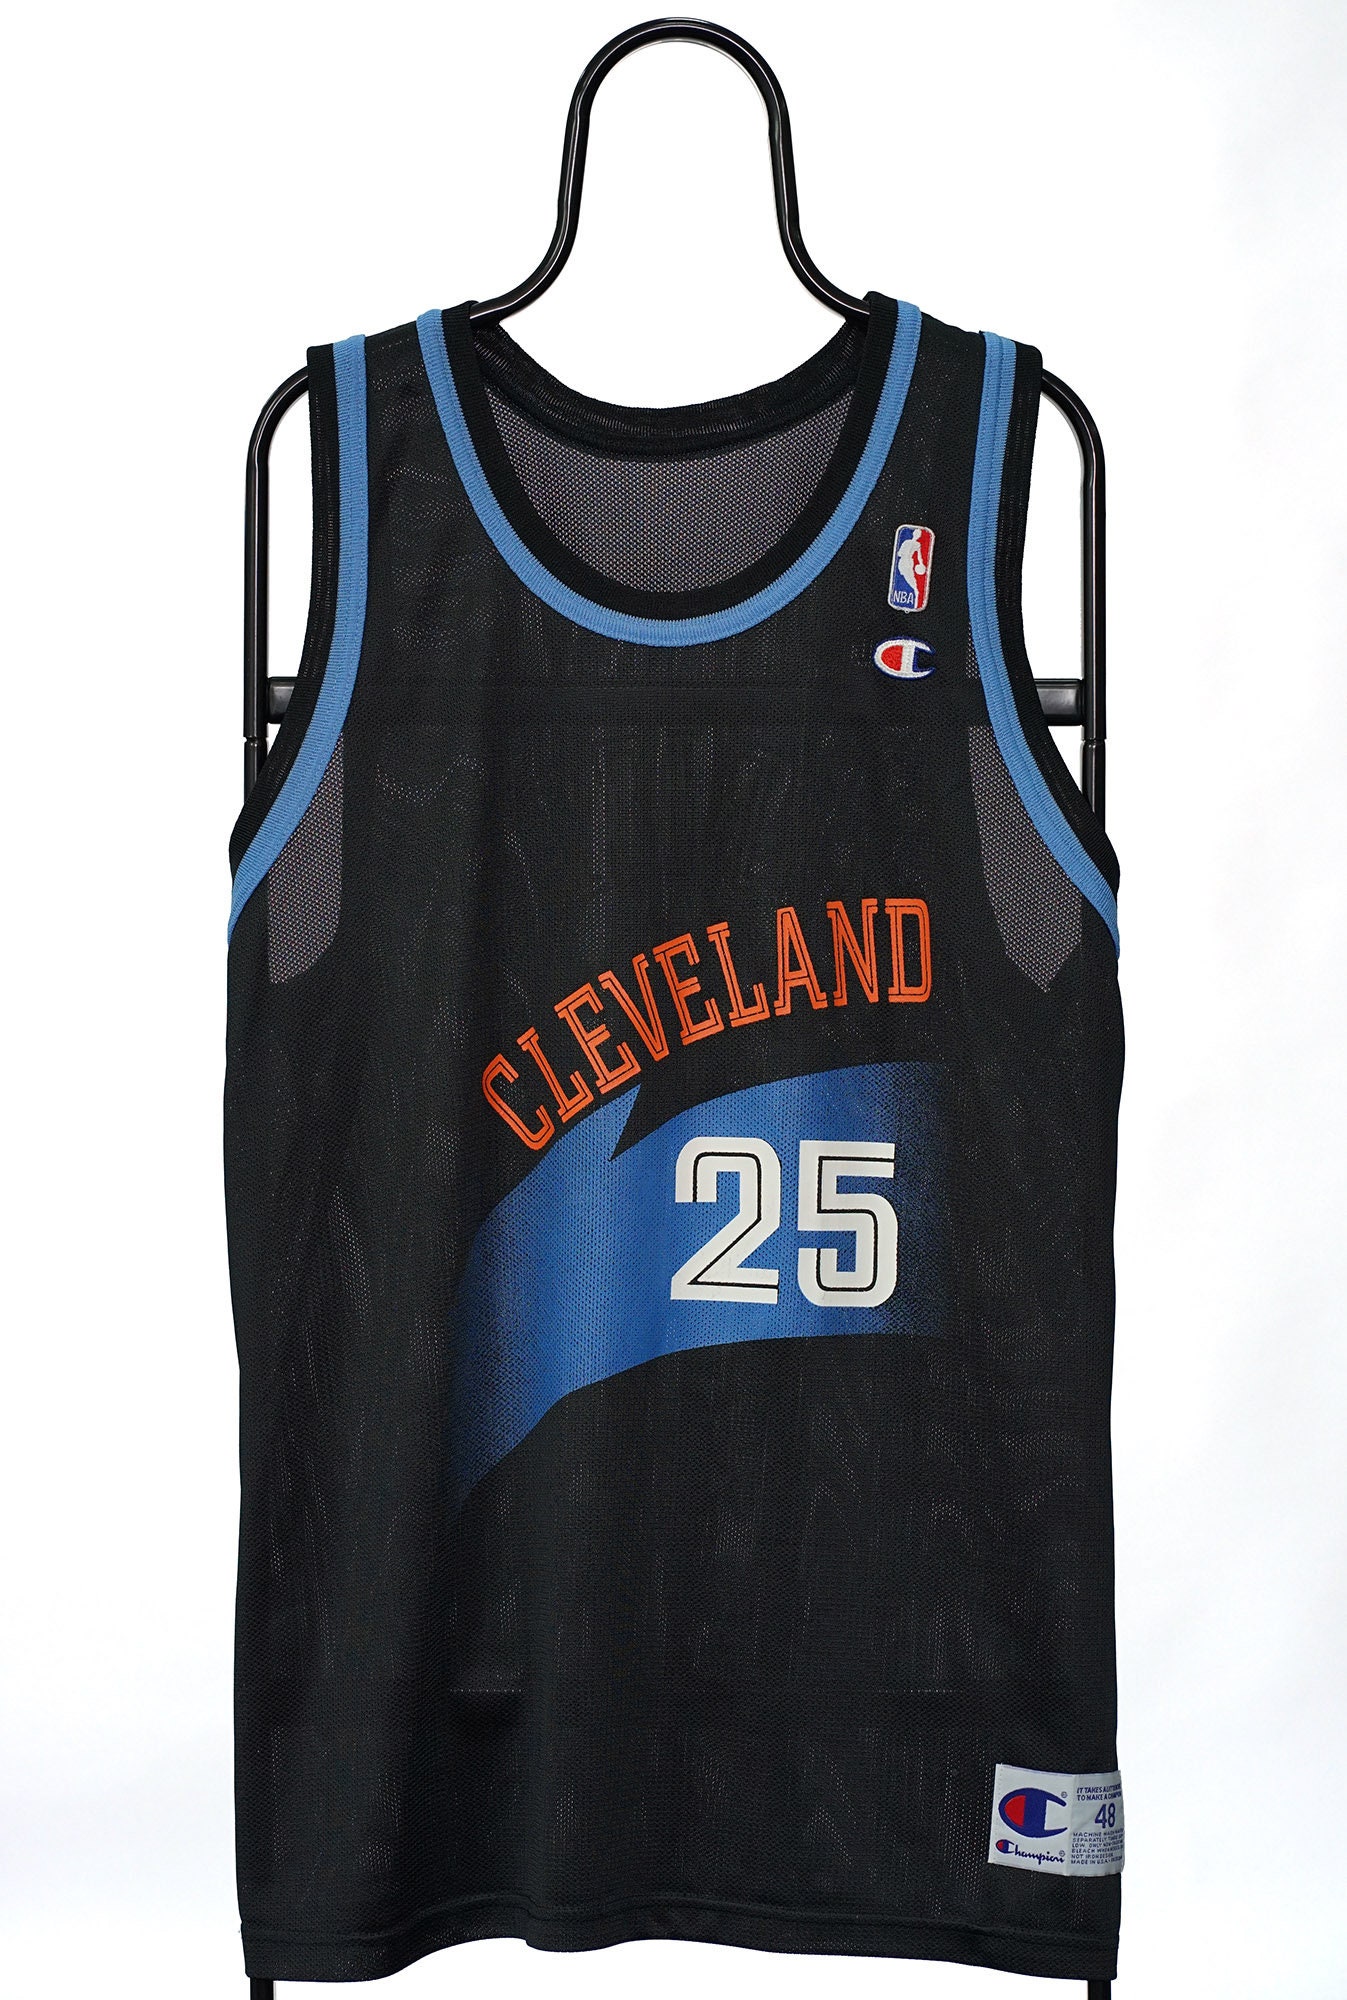 Buy the NWT Mens Green Donovan Cleveland Cavaliers Mitchell # 45